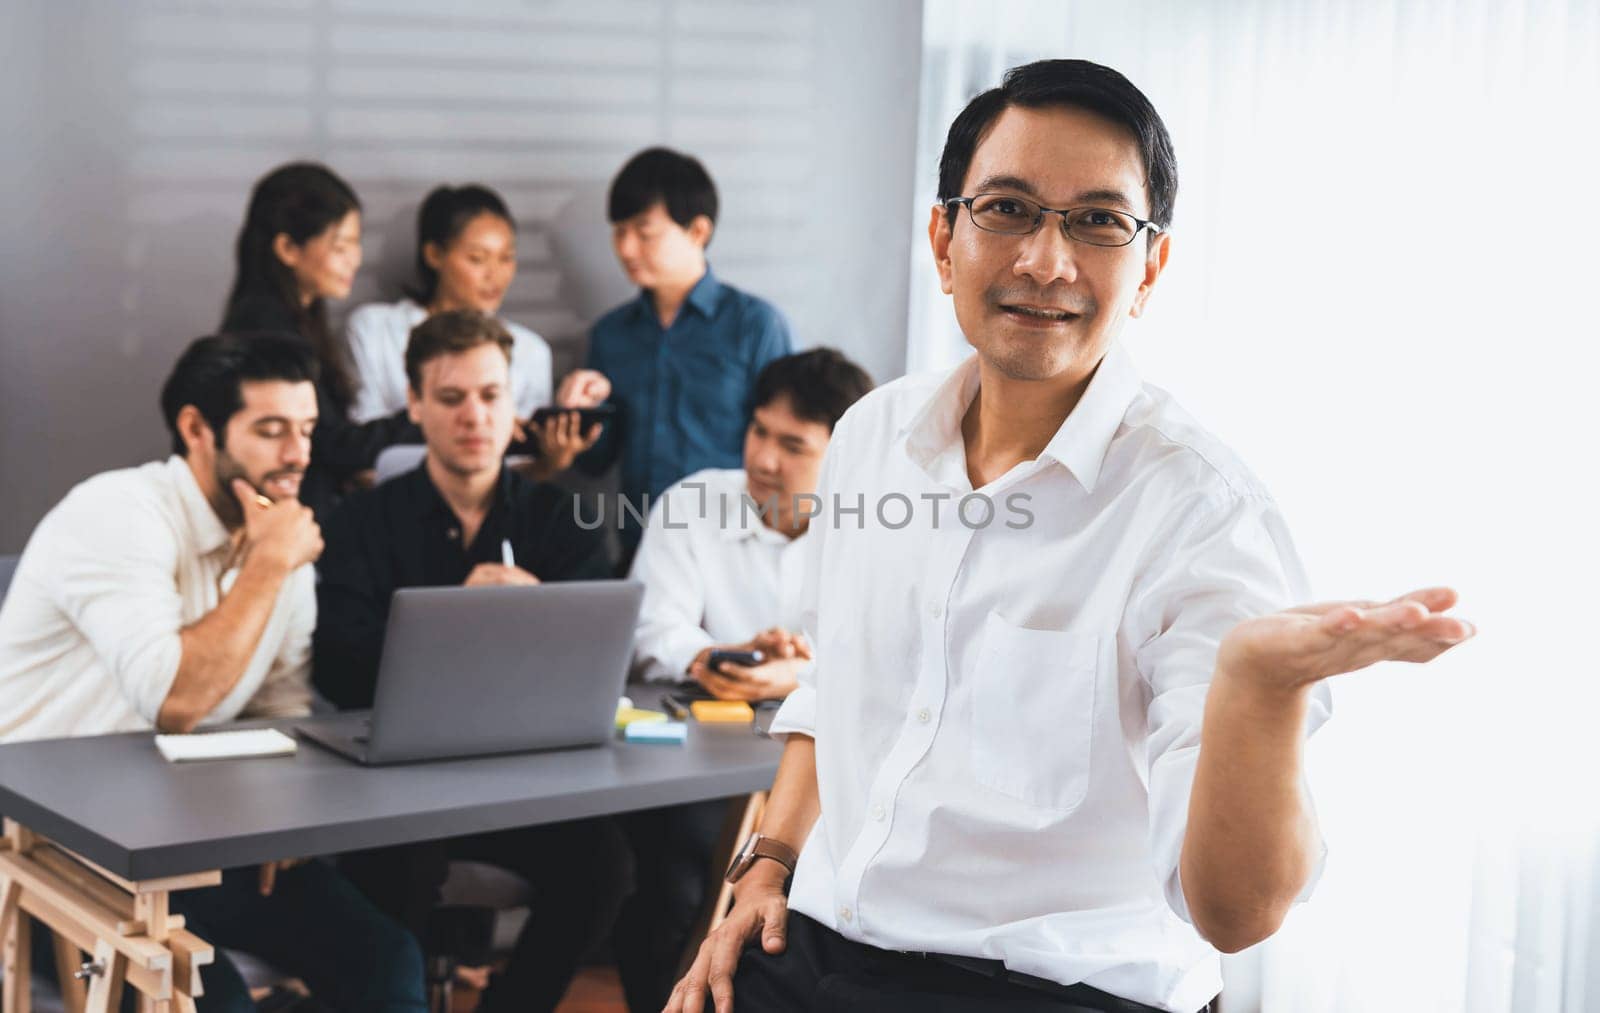 Confidence and happy smiling businessman portrait making advertising posture with background of business team working in office. Office worker and positive workplace for job recruitment. Prudent